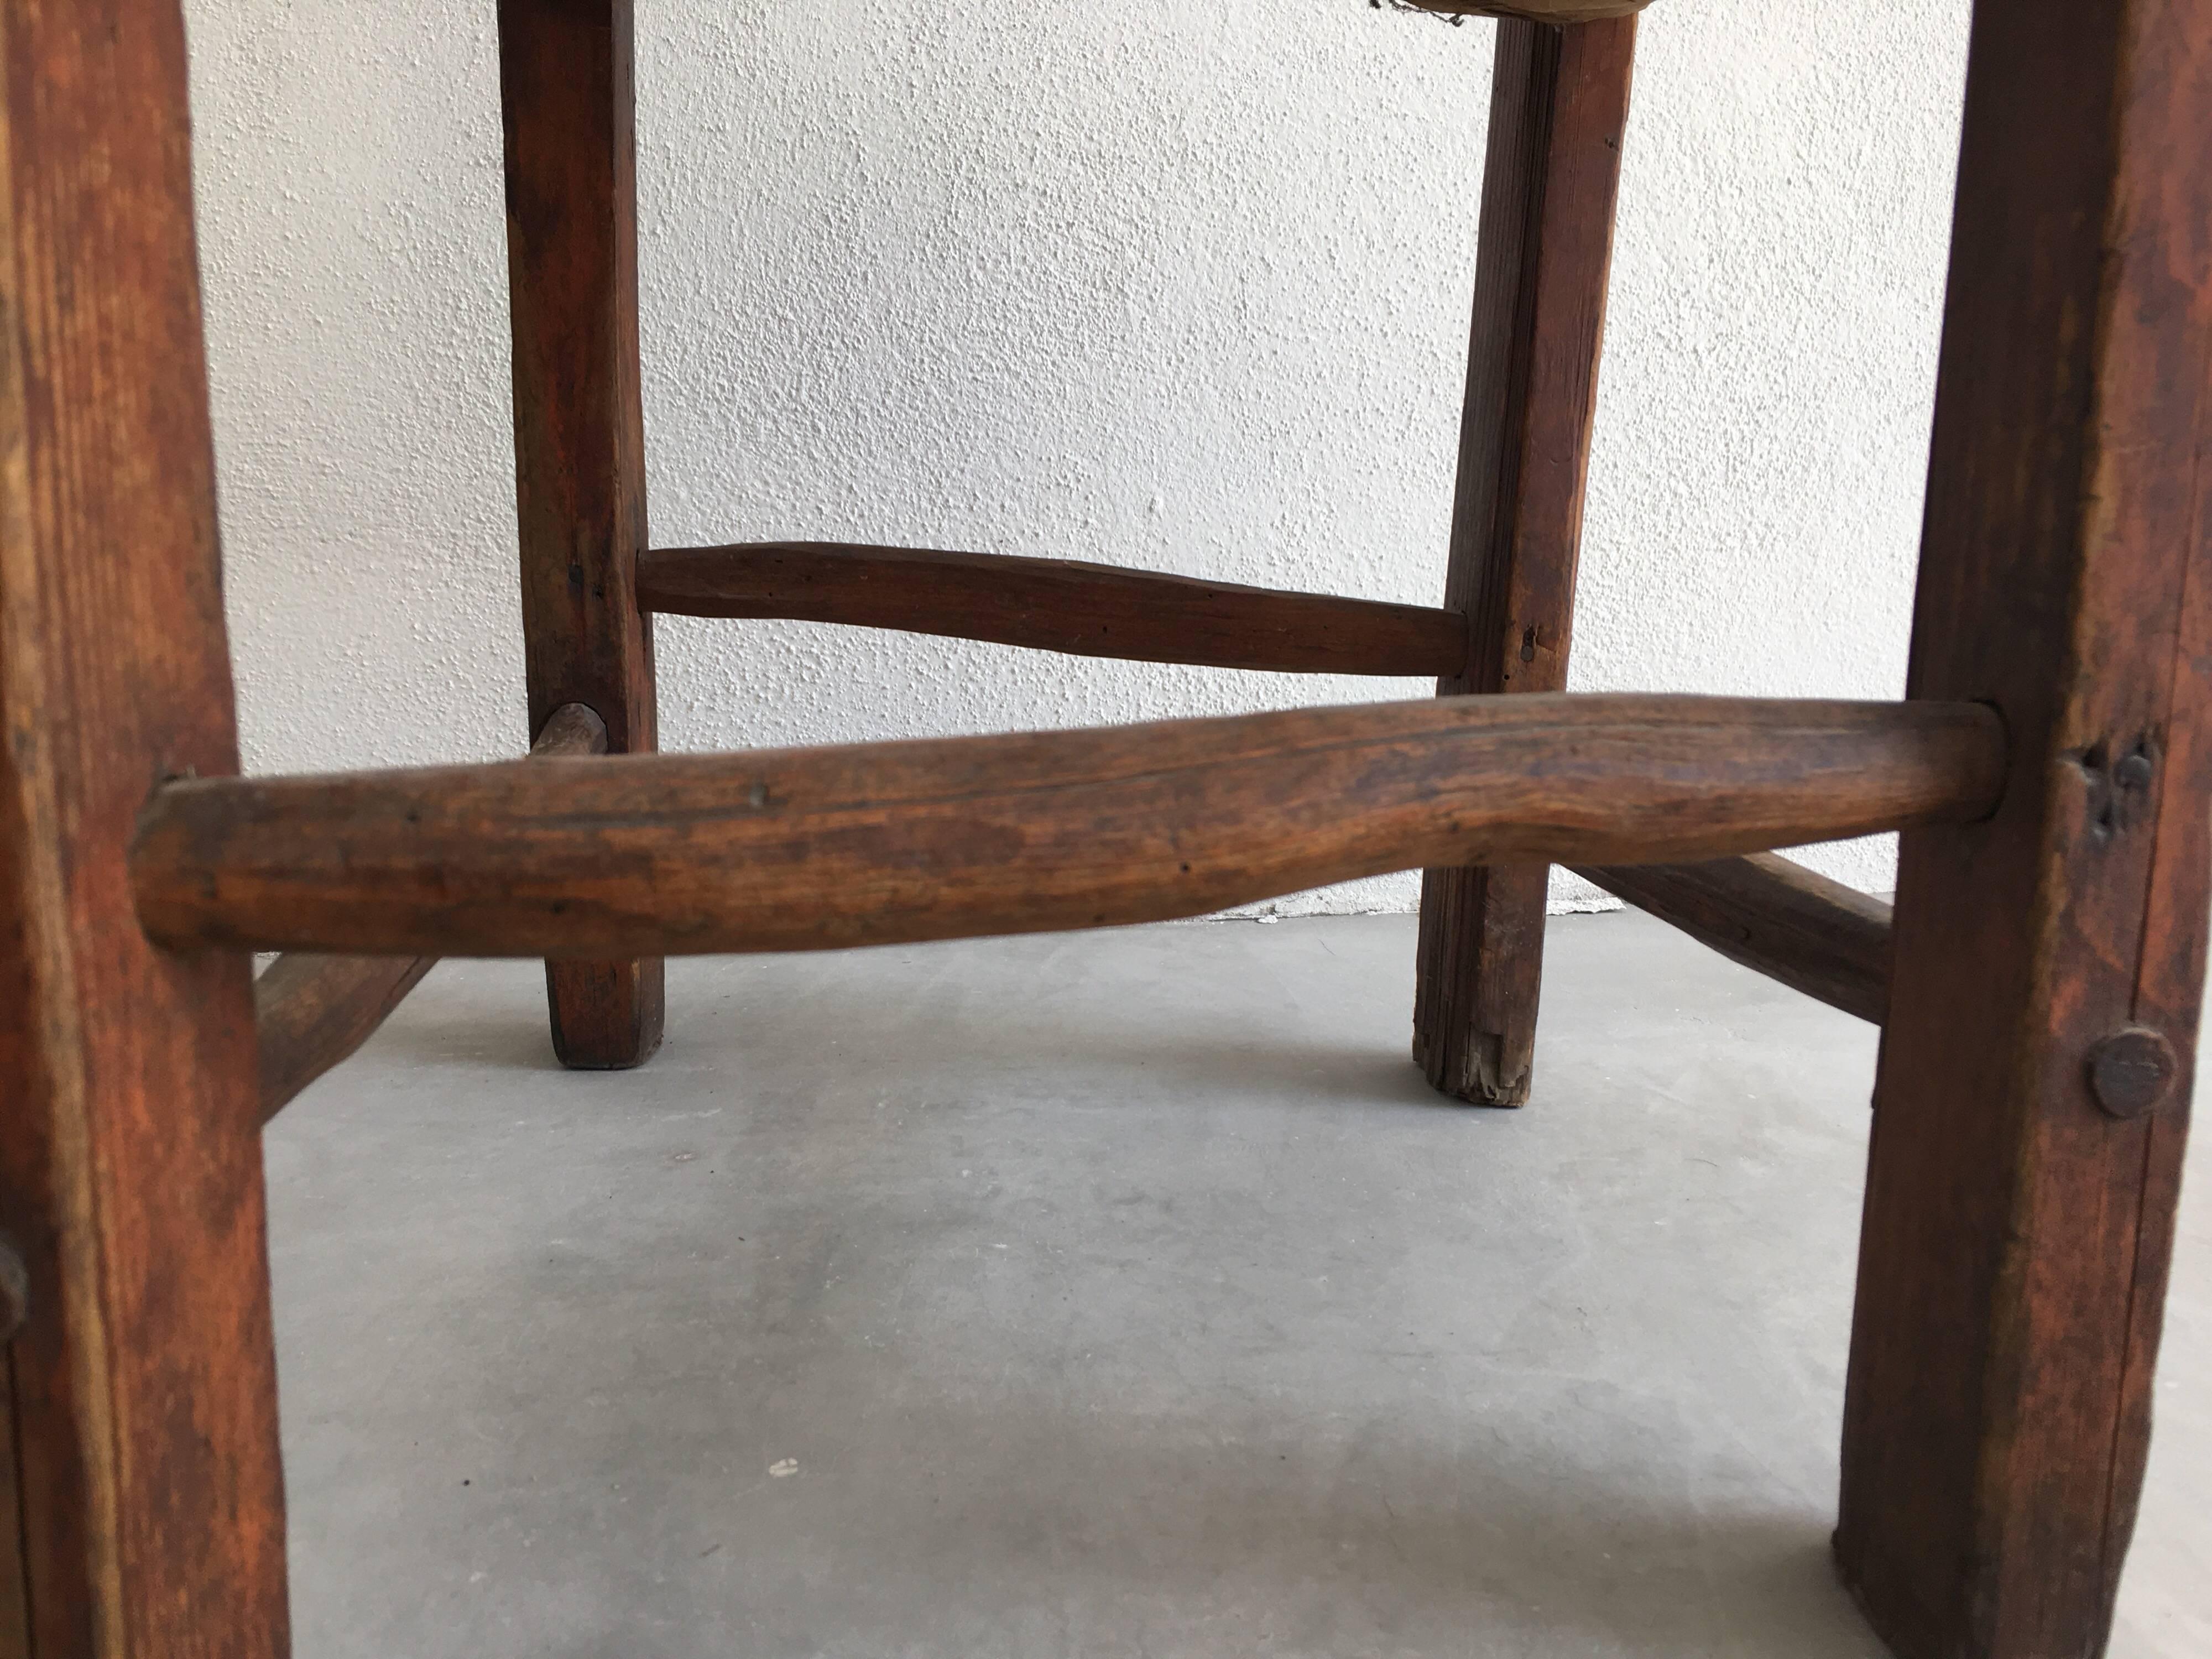 Rustic Quiroga Chairs from Mexico